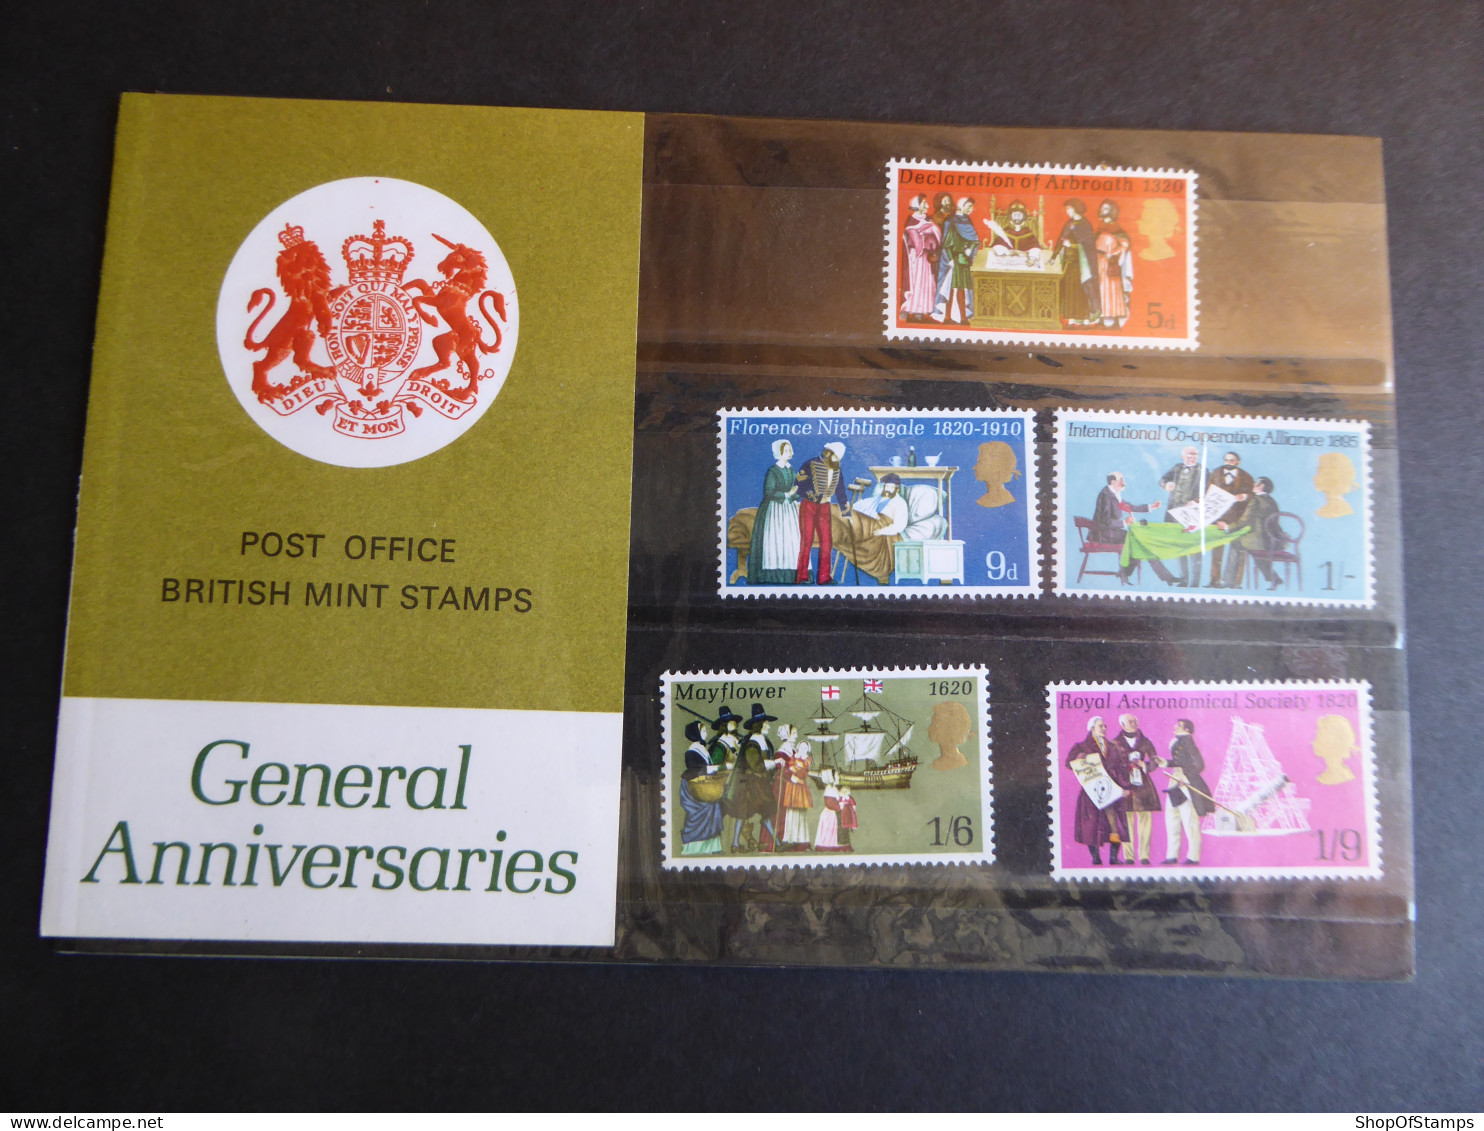 GREAT BRITAIN SG 819-23 ANNIVERSARIES EVENTS PRESENTATION PACK - Sheets, Plate Blocks & Multiples